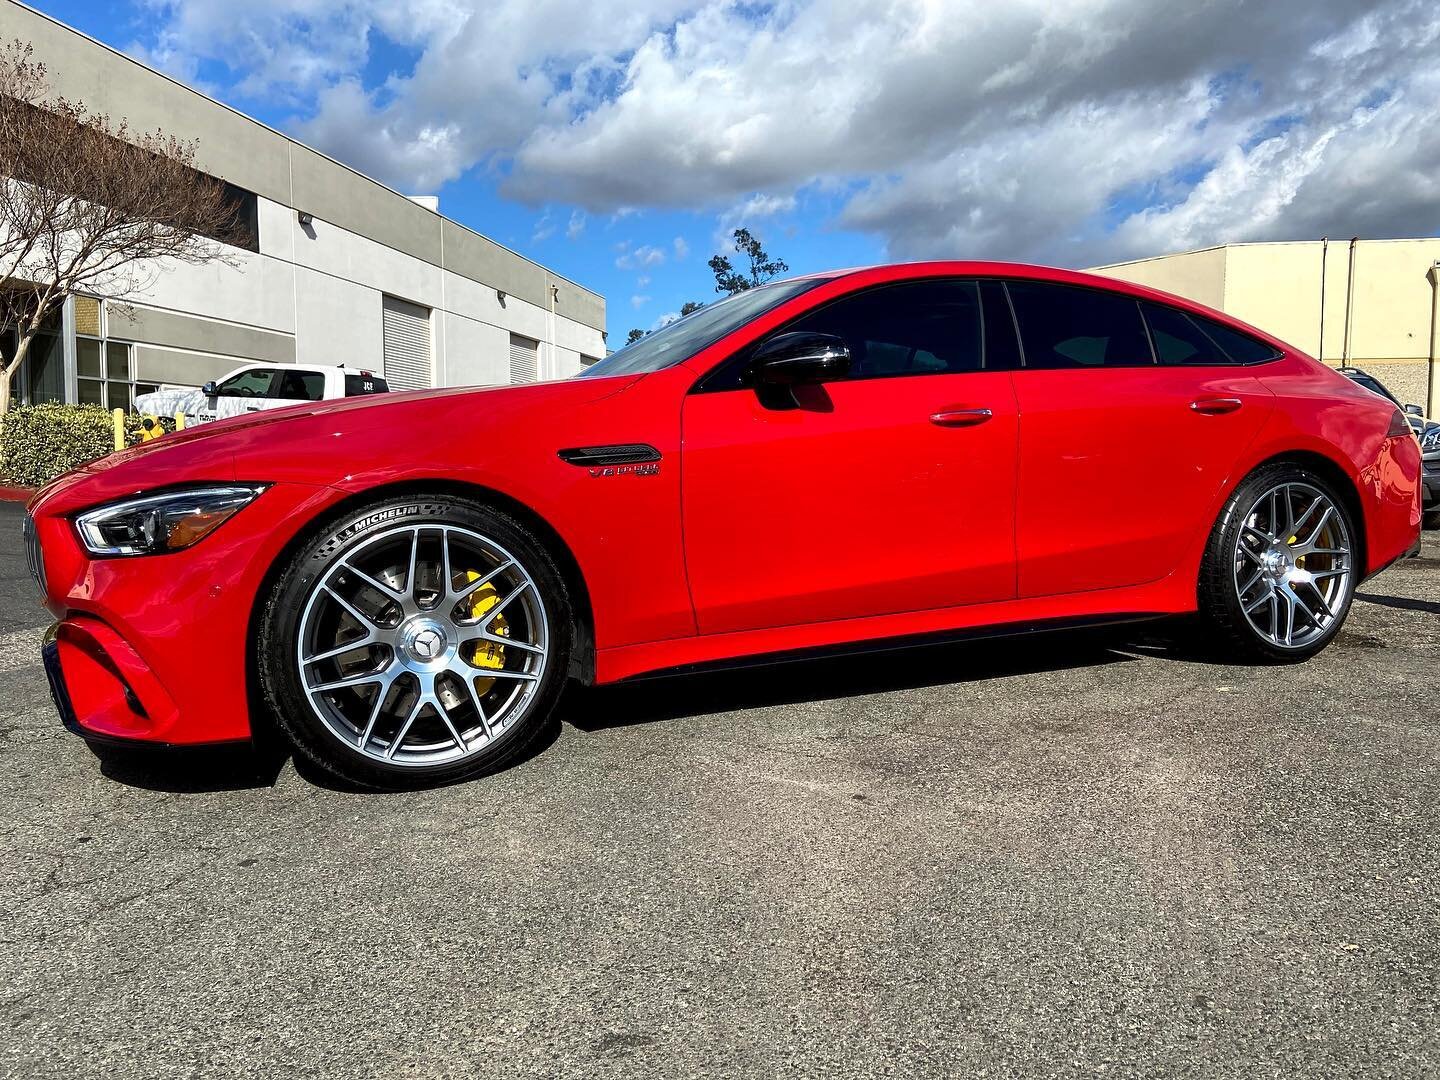 ✨Get Your Paint Treated &amp; Protected by @toptobottom_detailing from Ceramic Coatings to Paint Protection Films... We Can Get Your Vehicle Dialed In &amp; Looking NEW Again ✨
&bull;
BOOK APPOINTMENT:
951.775.7662
&bull;
FREE QUOTES:
toptobottomdeta